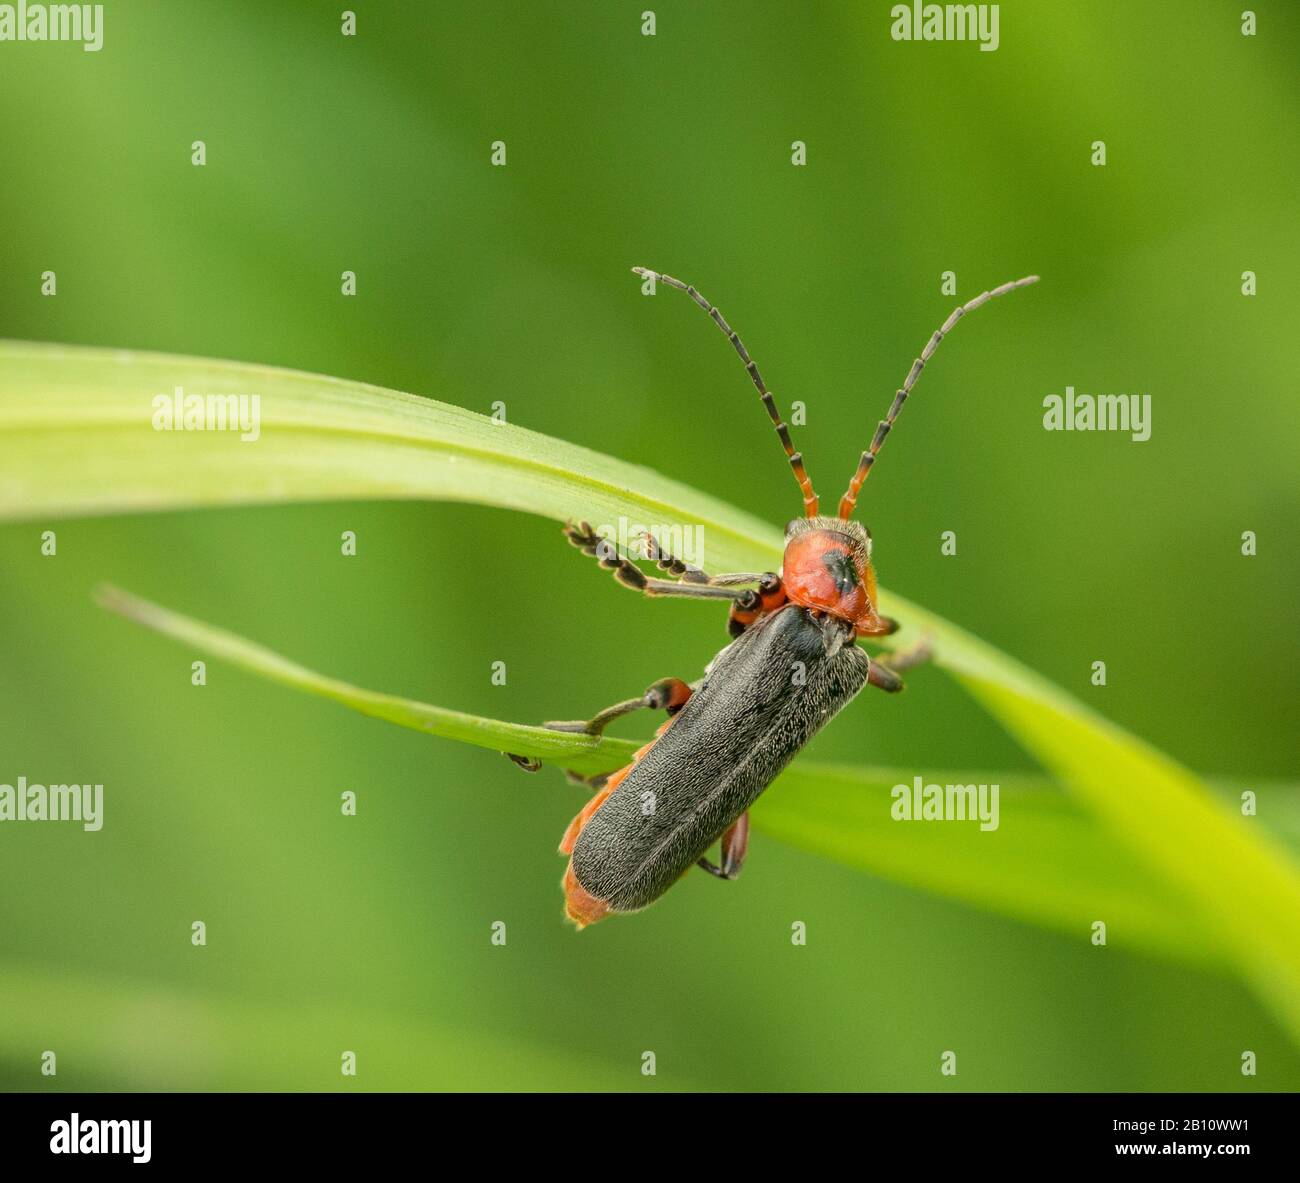 longhorn beetle crawling on grass leaves, wild, detail Stock Photo